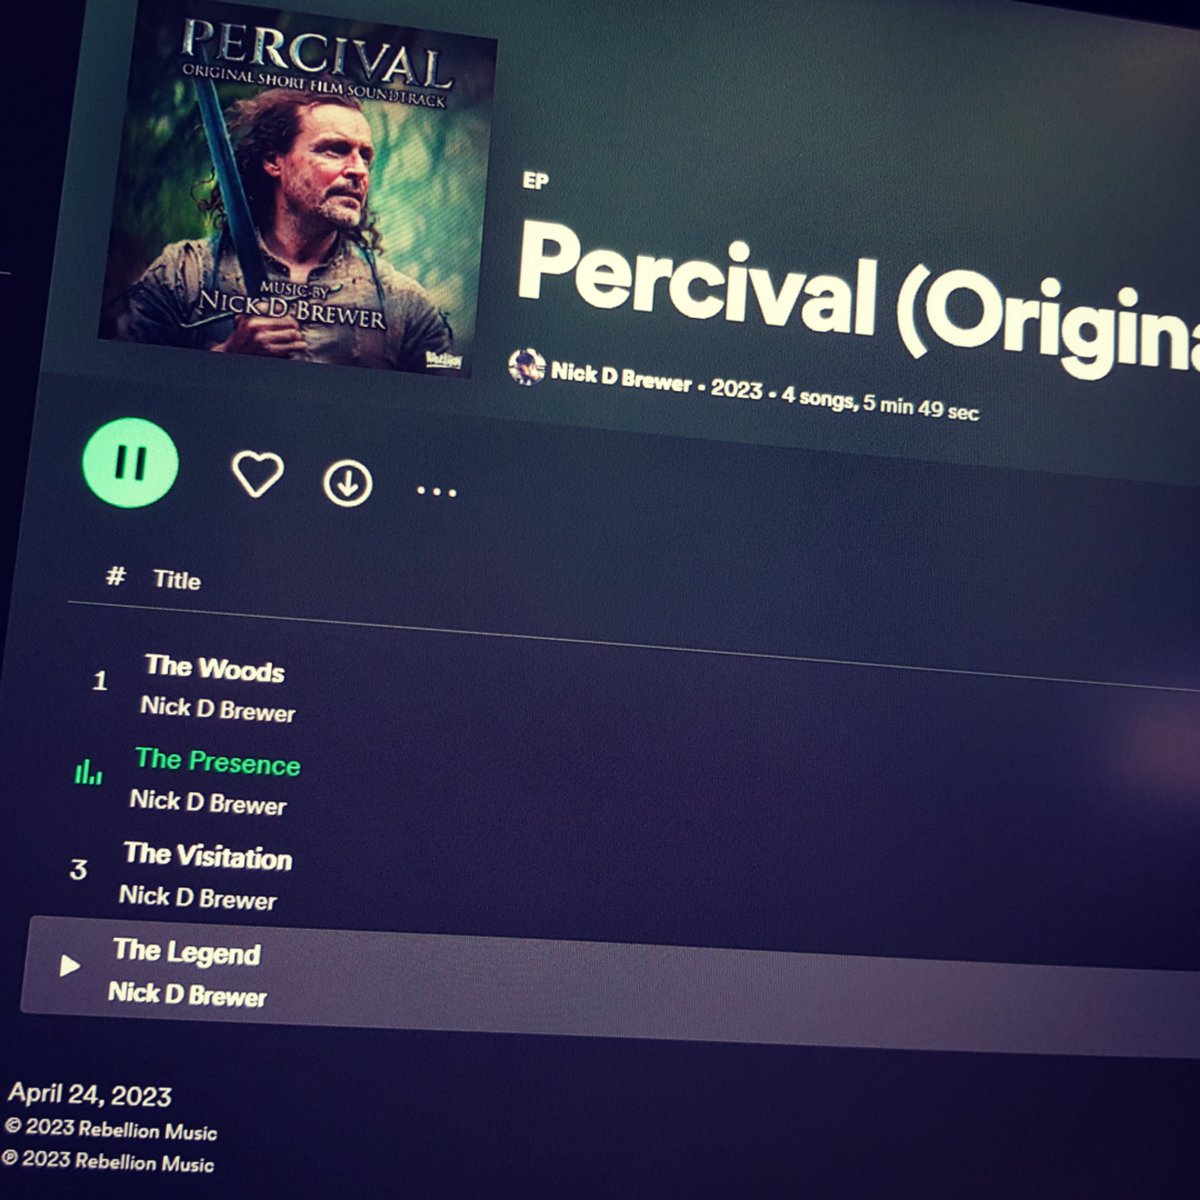 Out today! 🙌🏼 My soundtrack to the short film 'Percival', made by @Rebellion @RebellionFilmTV. Available to stream/download from Spotify, Apple Music & iTunes, Amazon Music, Deezer, etc etc #shortfilm #moviesoundtrack #filmsoundtrack #shortfilmsoundtrack #soundtrack #percival